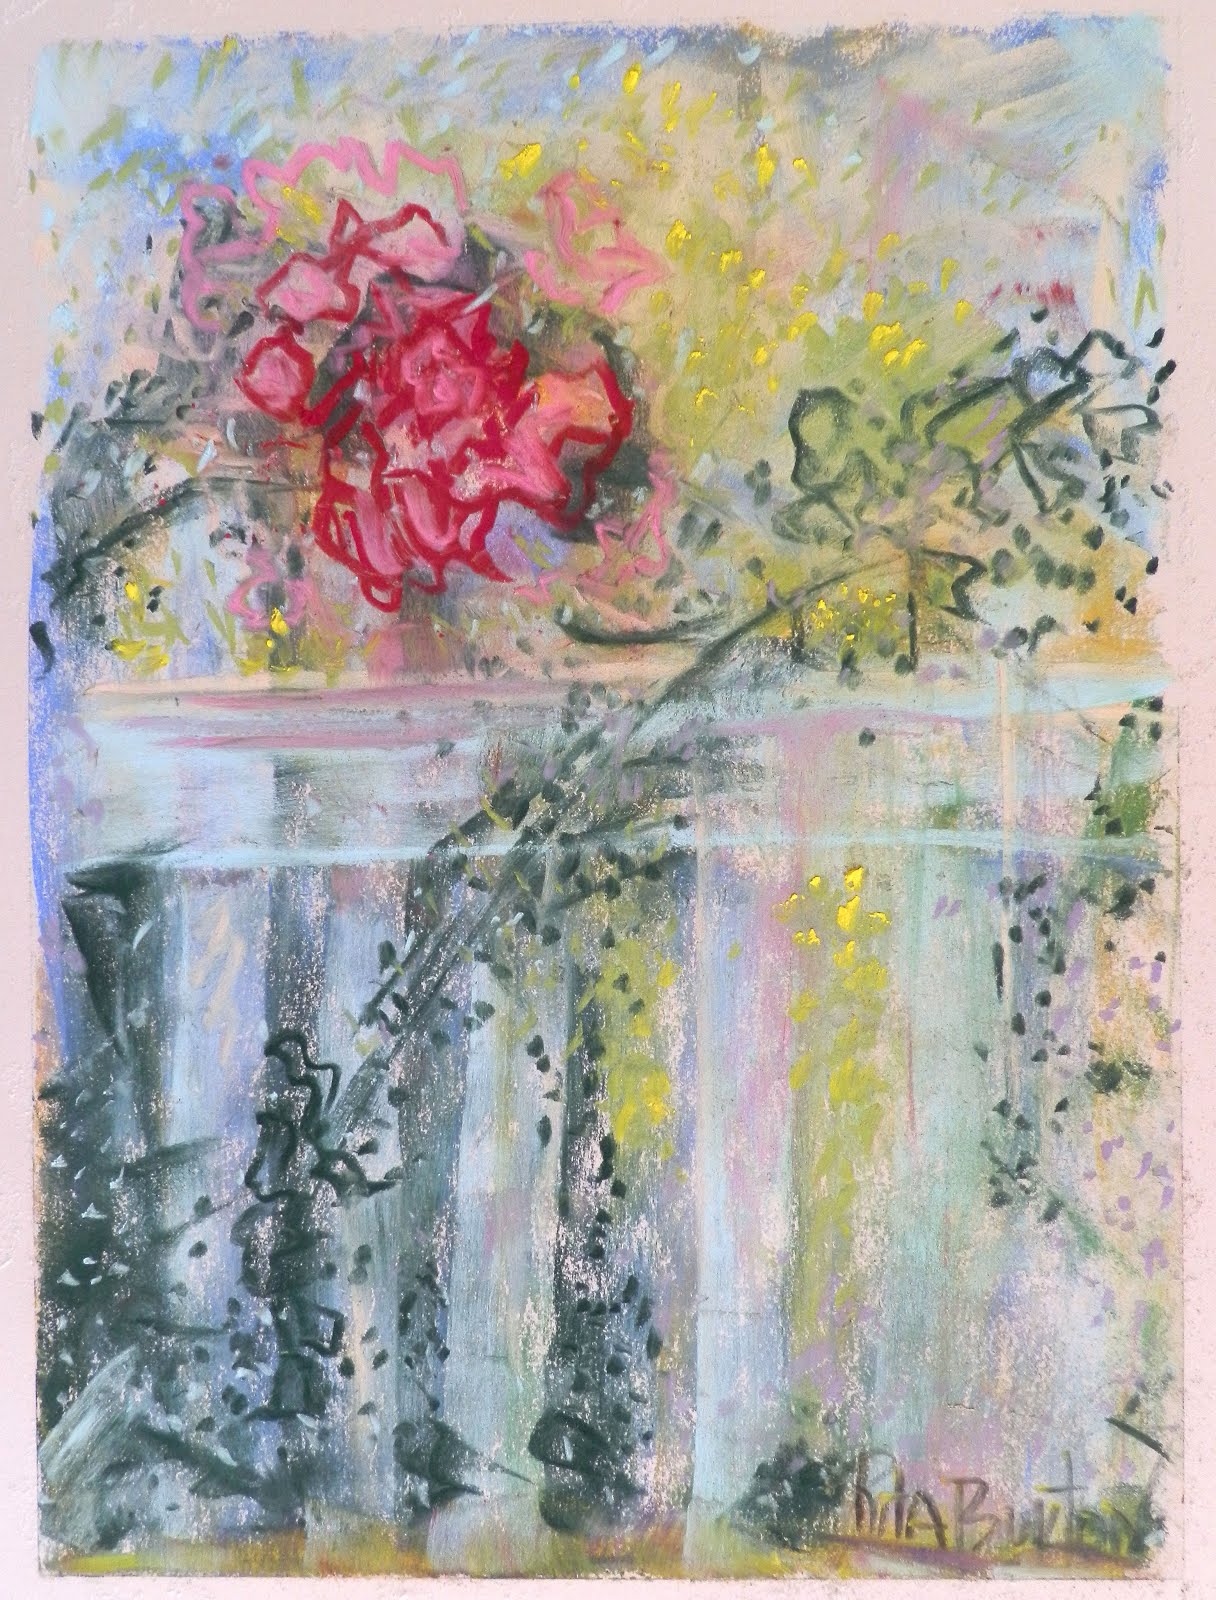 "A ROSE AT THE GATE"